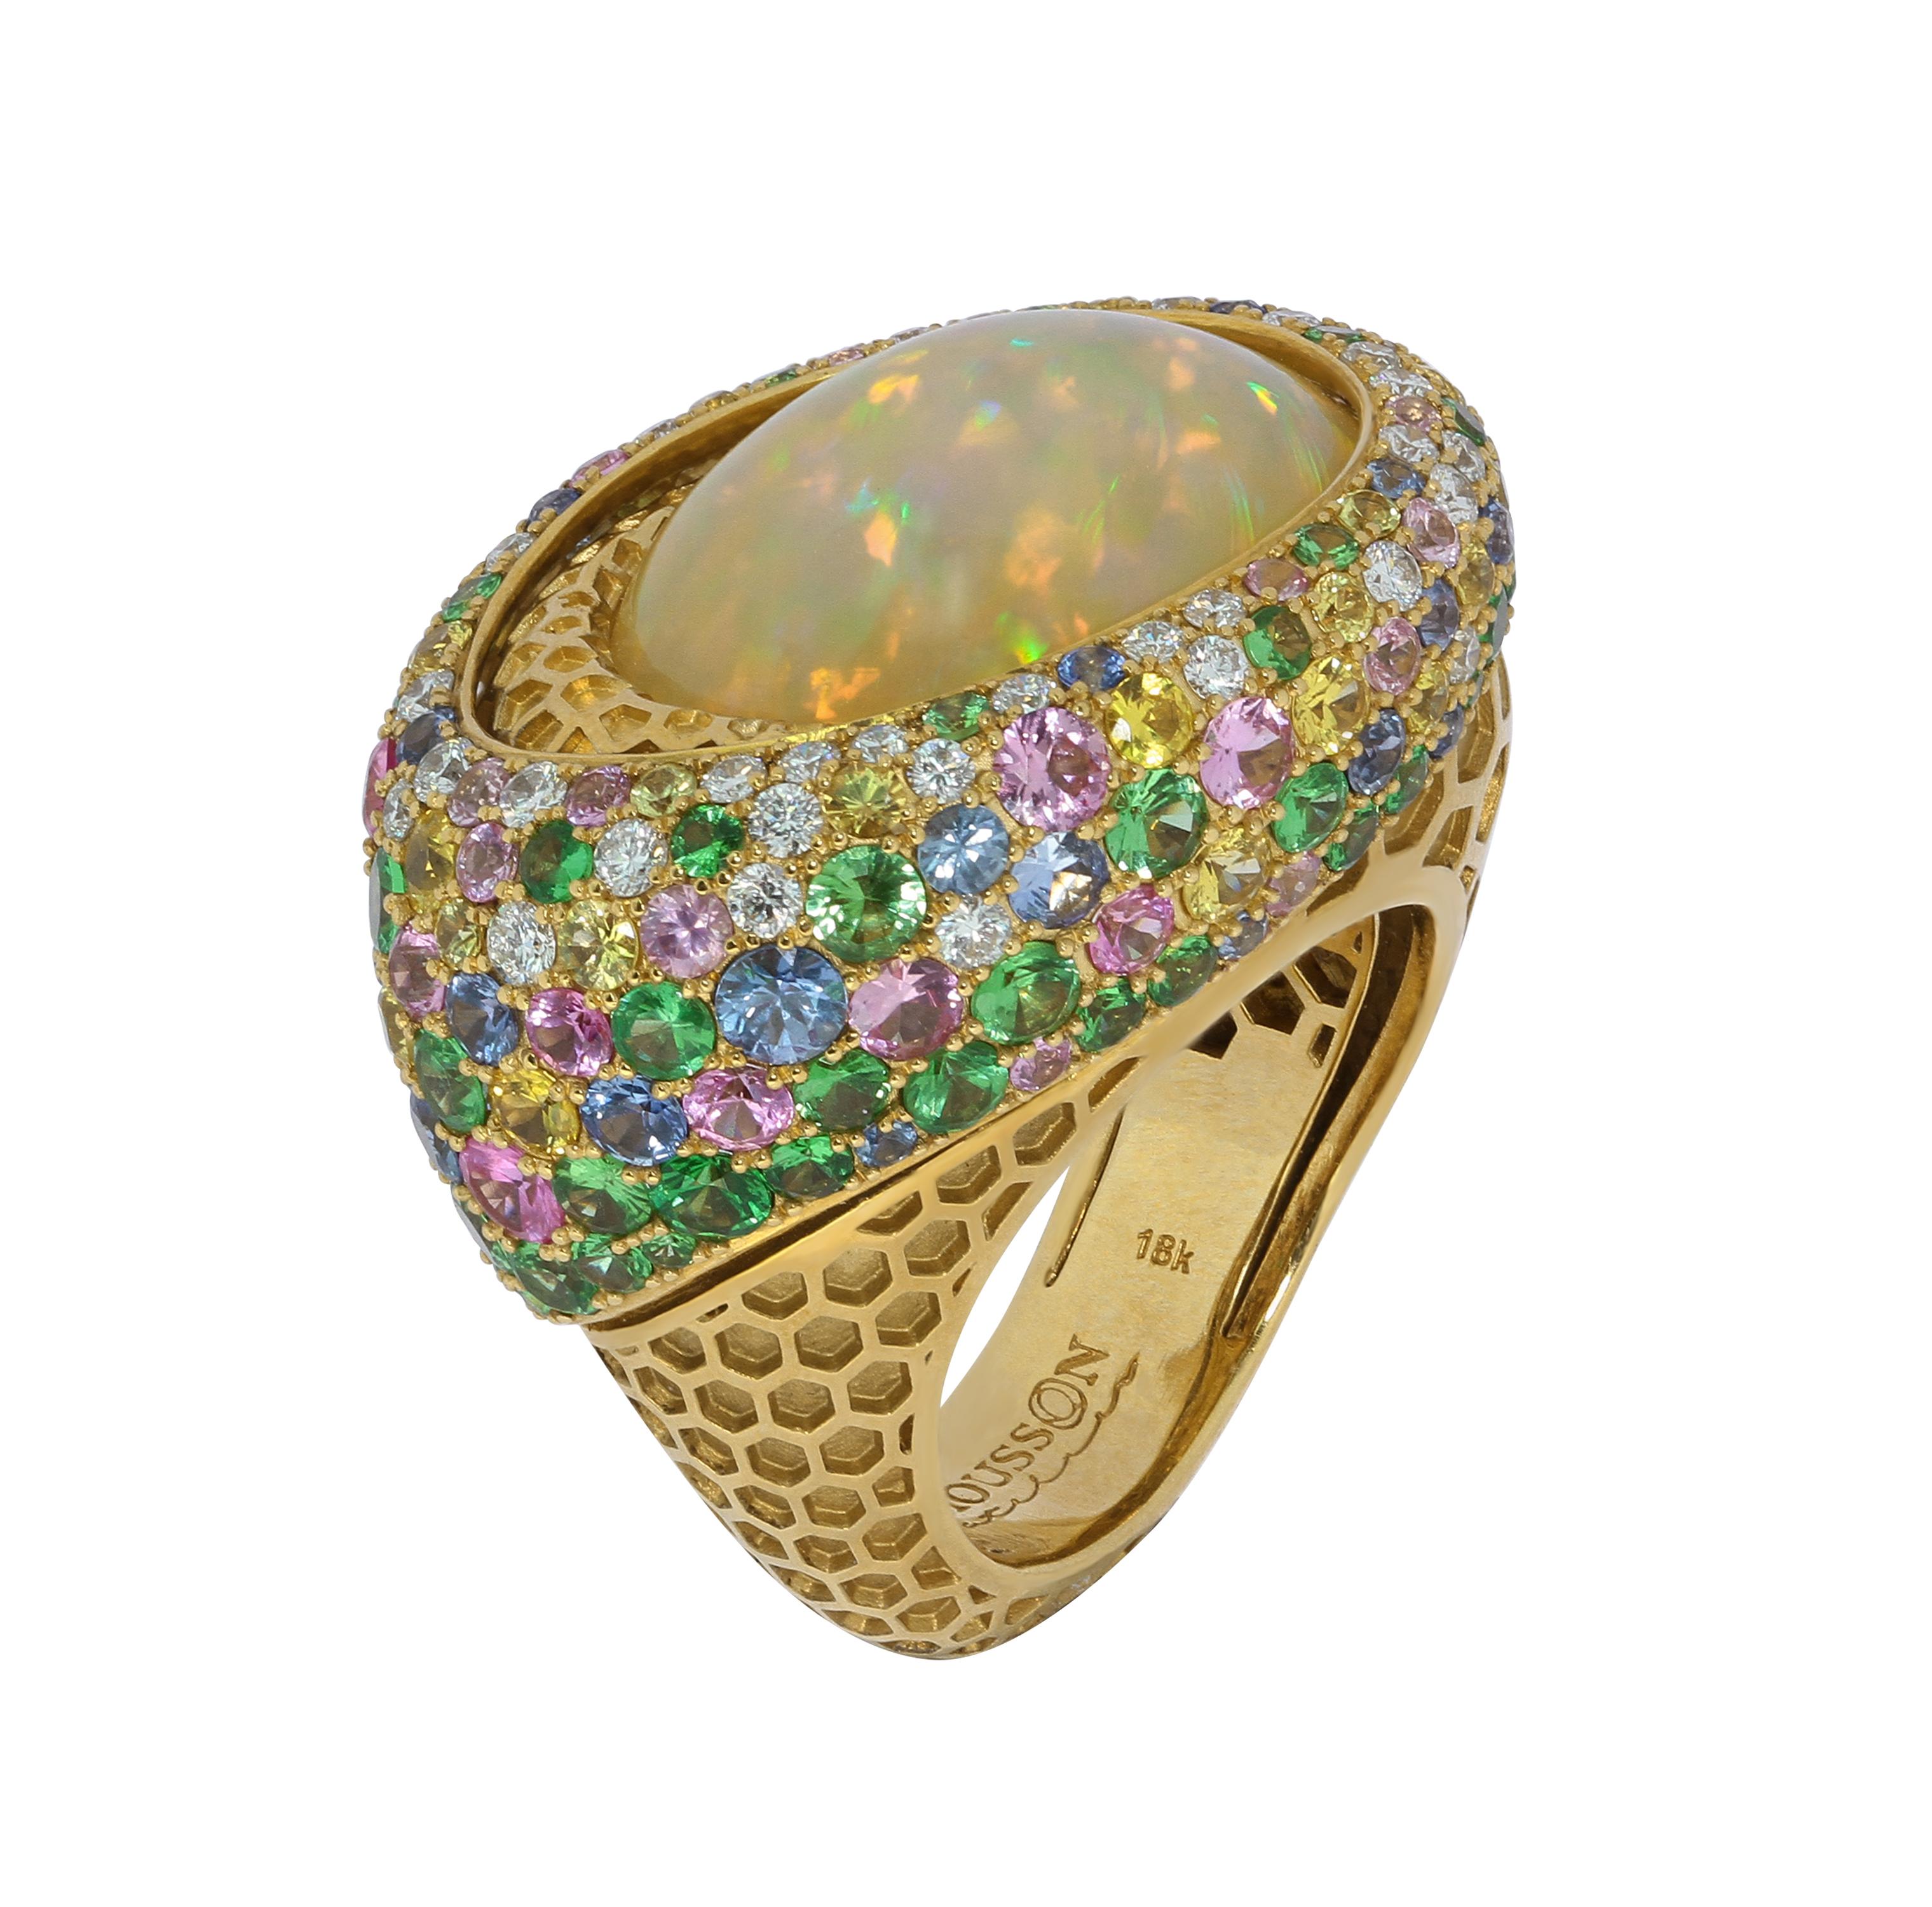 Opal 9.14 Carat Diamonds Sapphires 18 Karat Yellow Gold Honeycombs Ring

This ring is full of sweeteness!!! Yellow honeycombs of 18K Gold meets with multicolor confeture of Yellow, Pink, Blue Sapphires, Tsavorites and Diamonds around appetizing